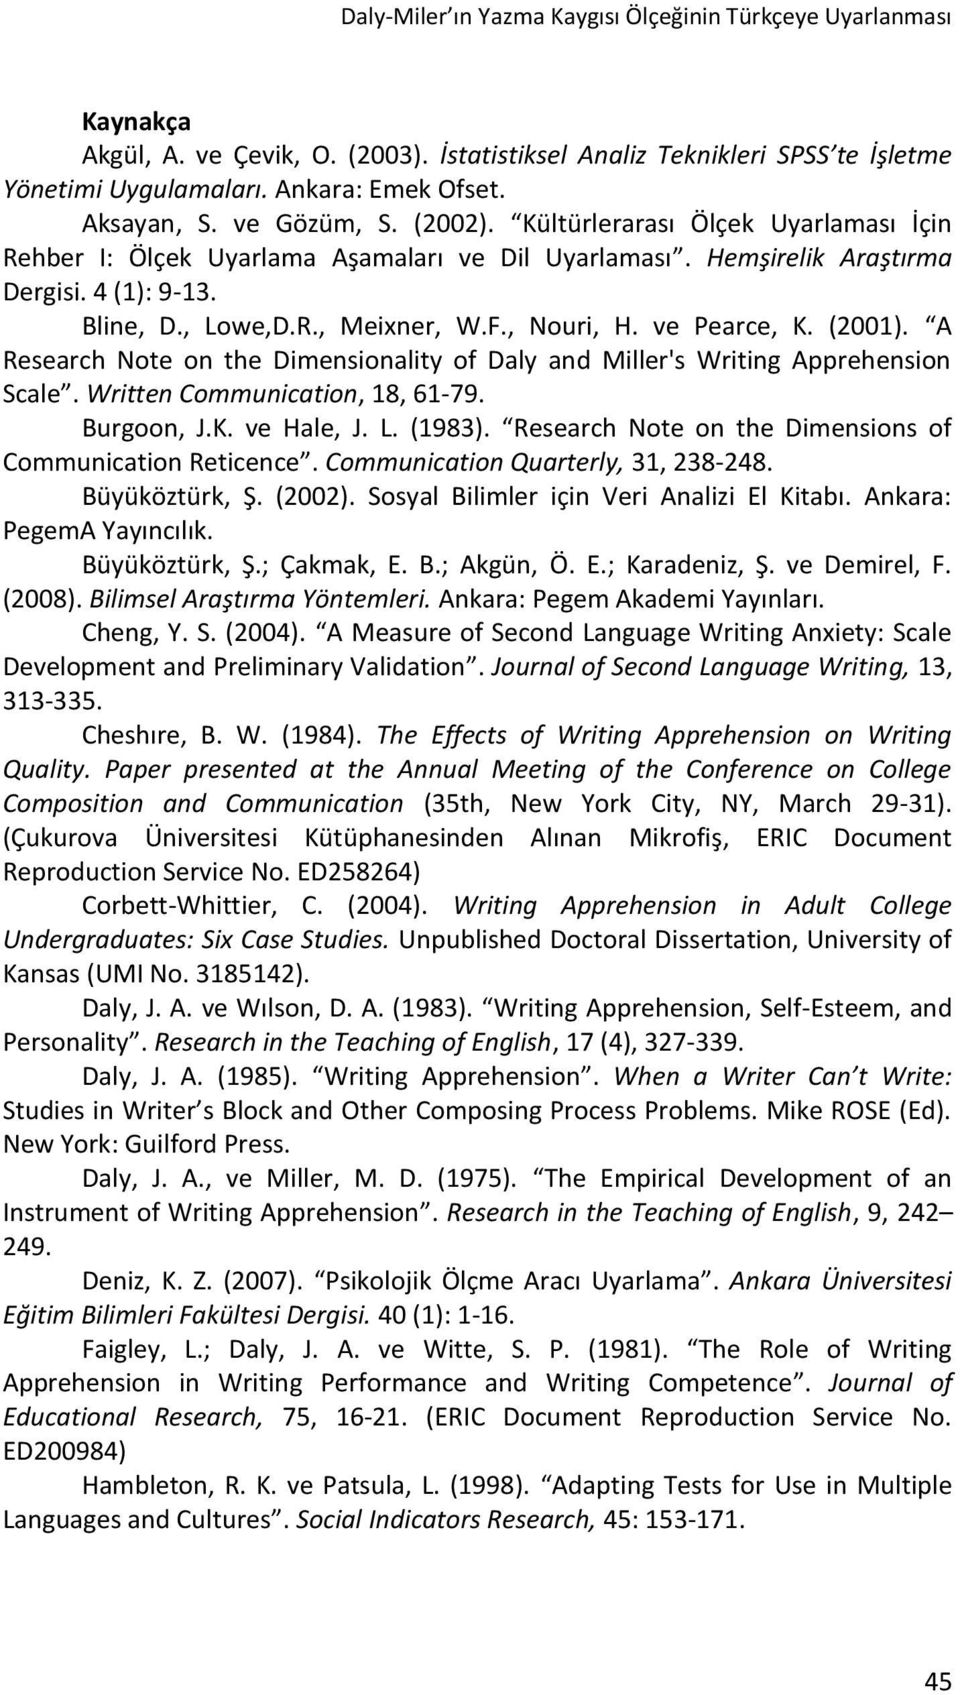 F., ouri, H. ve Pearce, K. (2001). A Research ote on the Dimensionality of Daly and Miller's Writing Apprehension Scale. Written Communication, 18, 61-79. Burgoon, J.K. ve Hale, J. L. (1983).